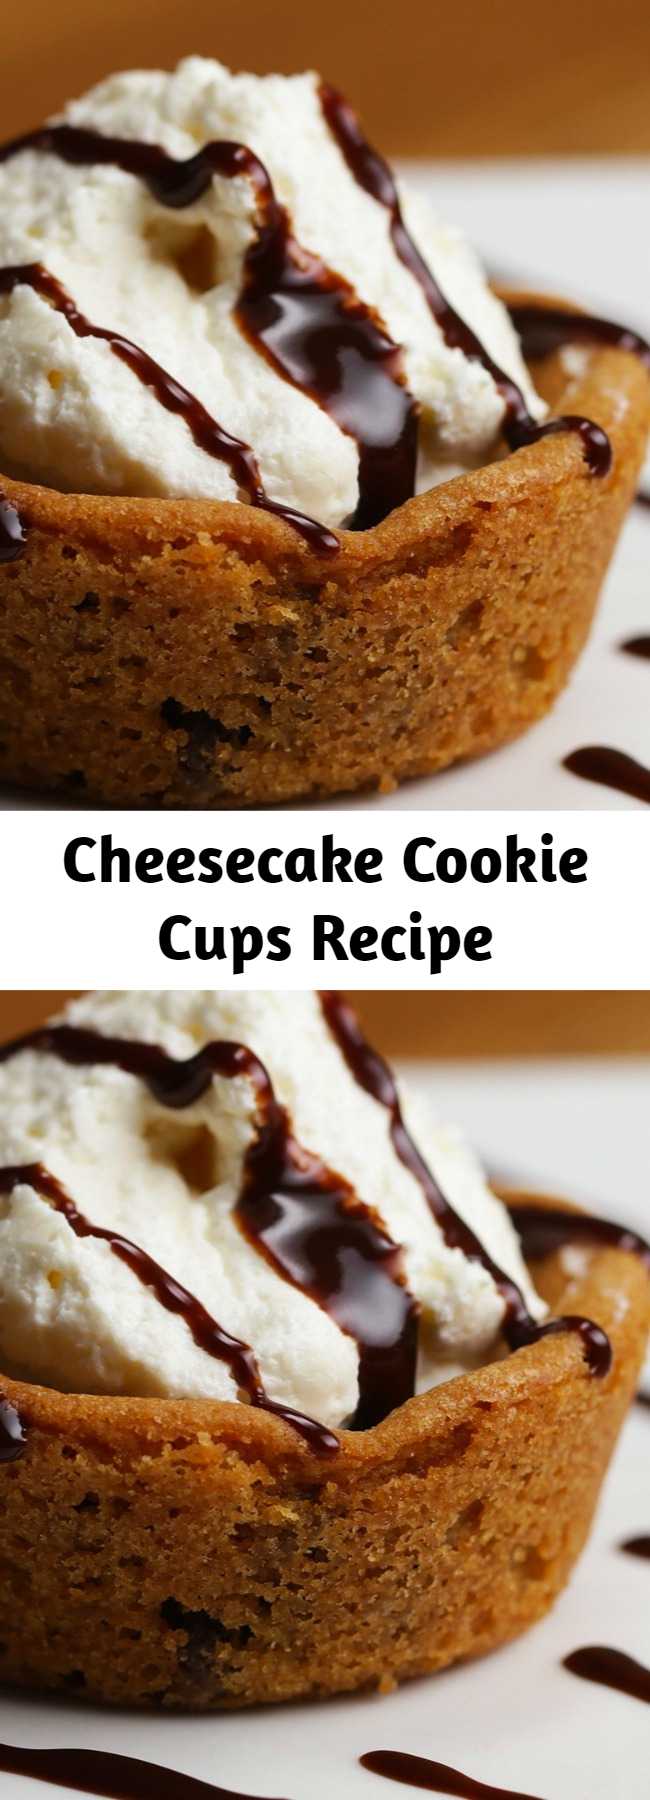 Cookie cups hold a rich cheesecake filling. Impressive, yet ridiculously easy!